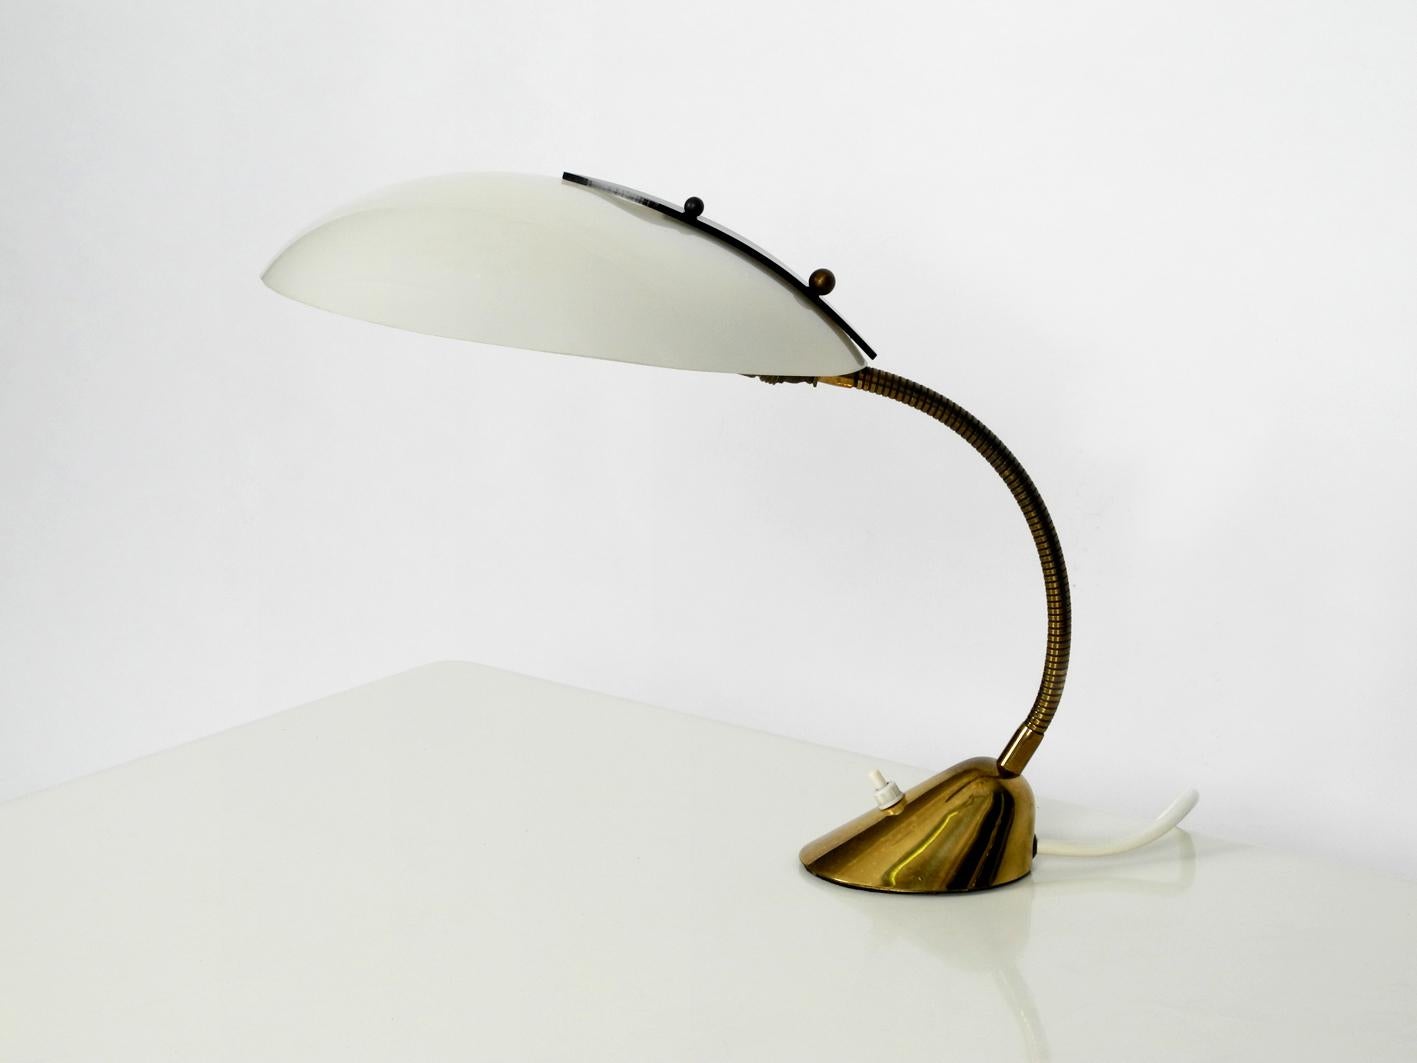 Very rare Mid-Century Modern brass table lamp with plexiglass shade. The freely movable neck and foot are made of brass. Ideal as a reading and desk lamp. Nice light also through the slightly transparent shade.
Very nice condition without damage